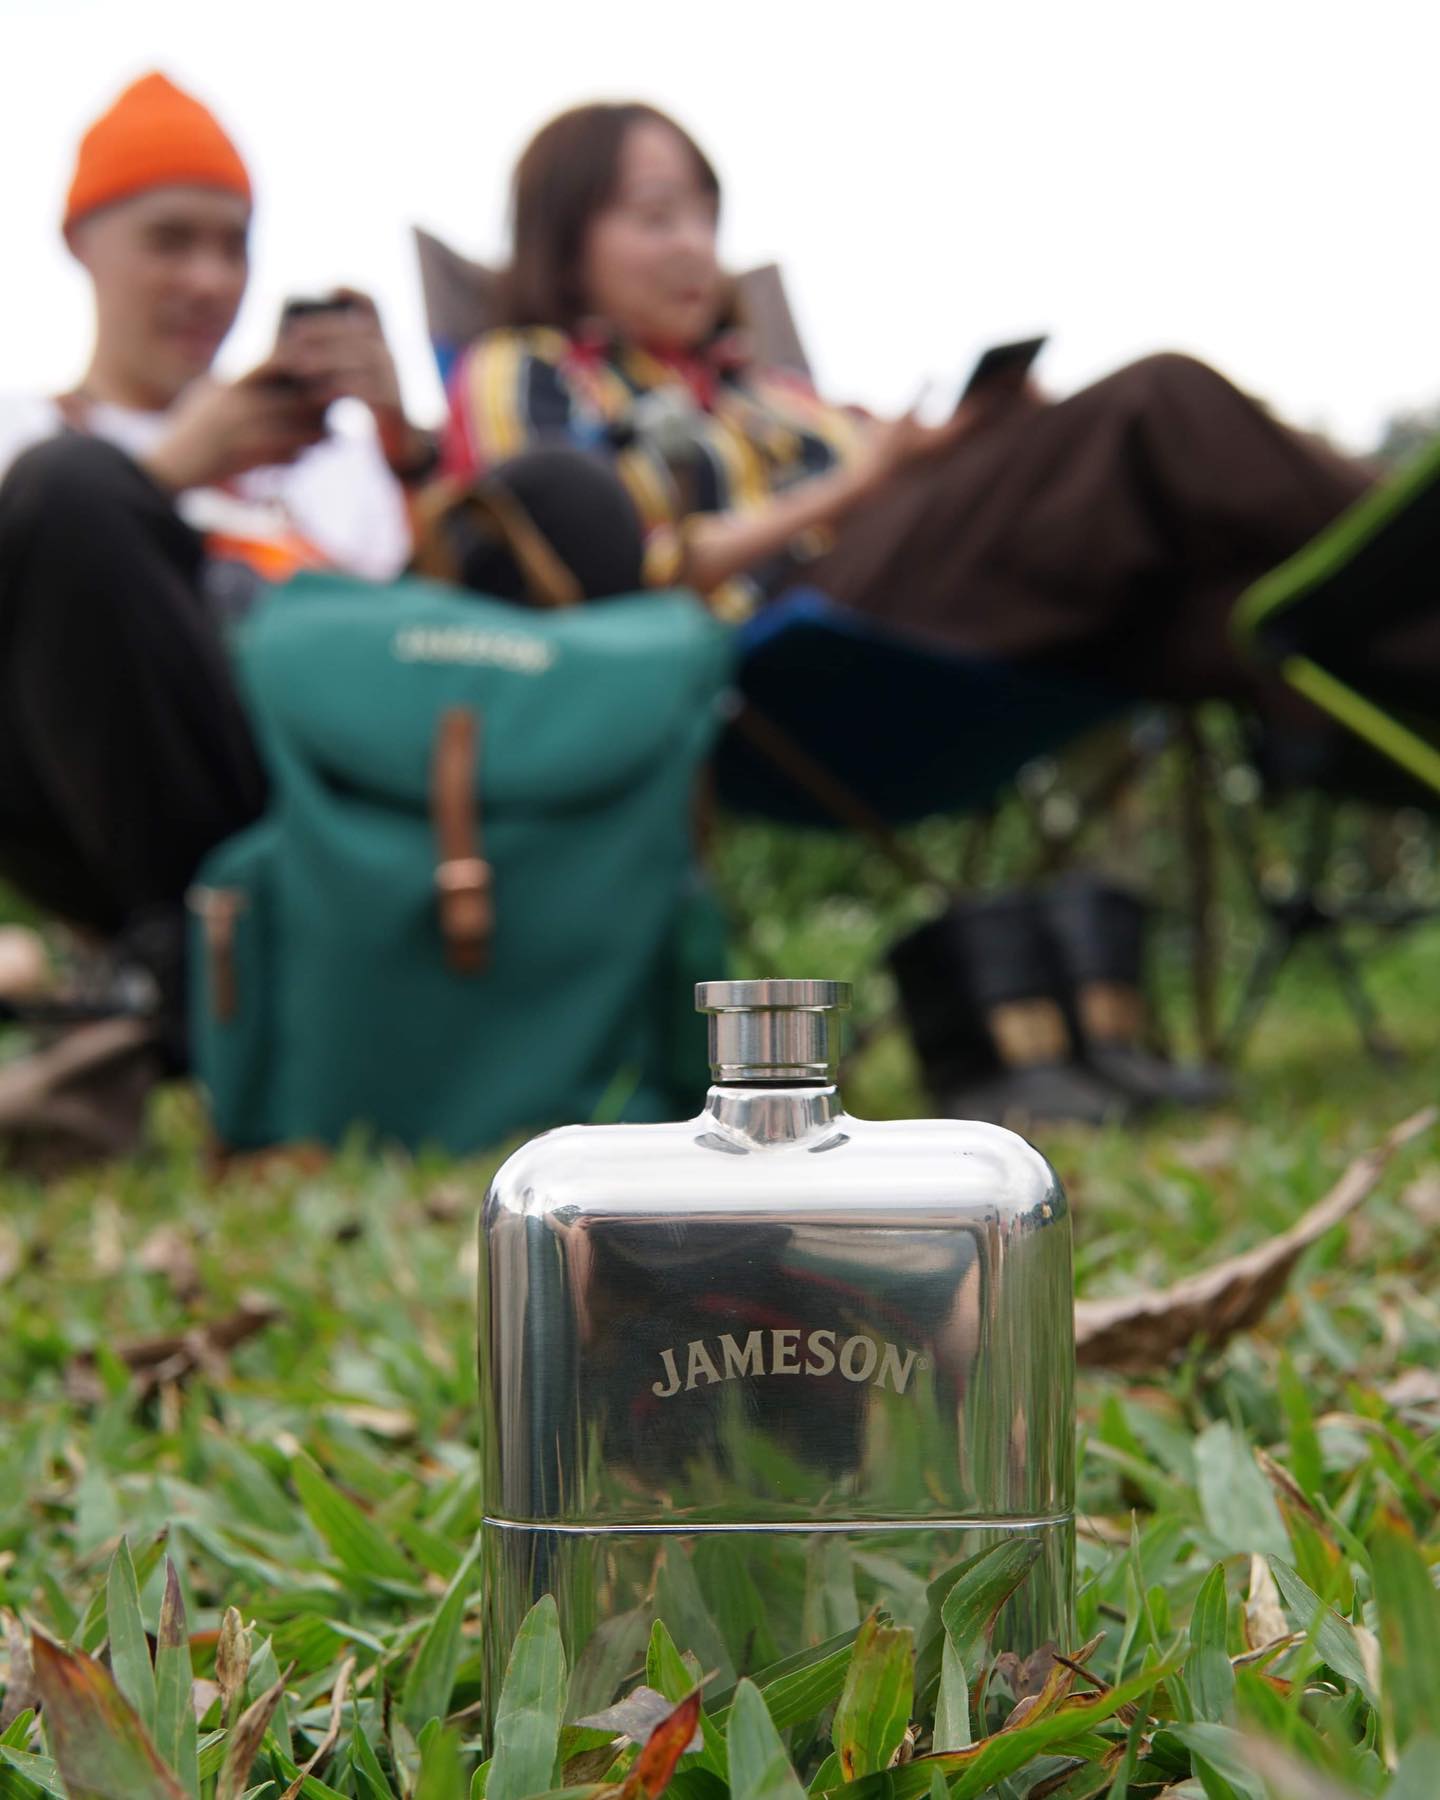 Jameson branded hip flask being used while camping